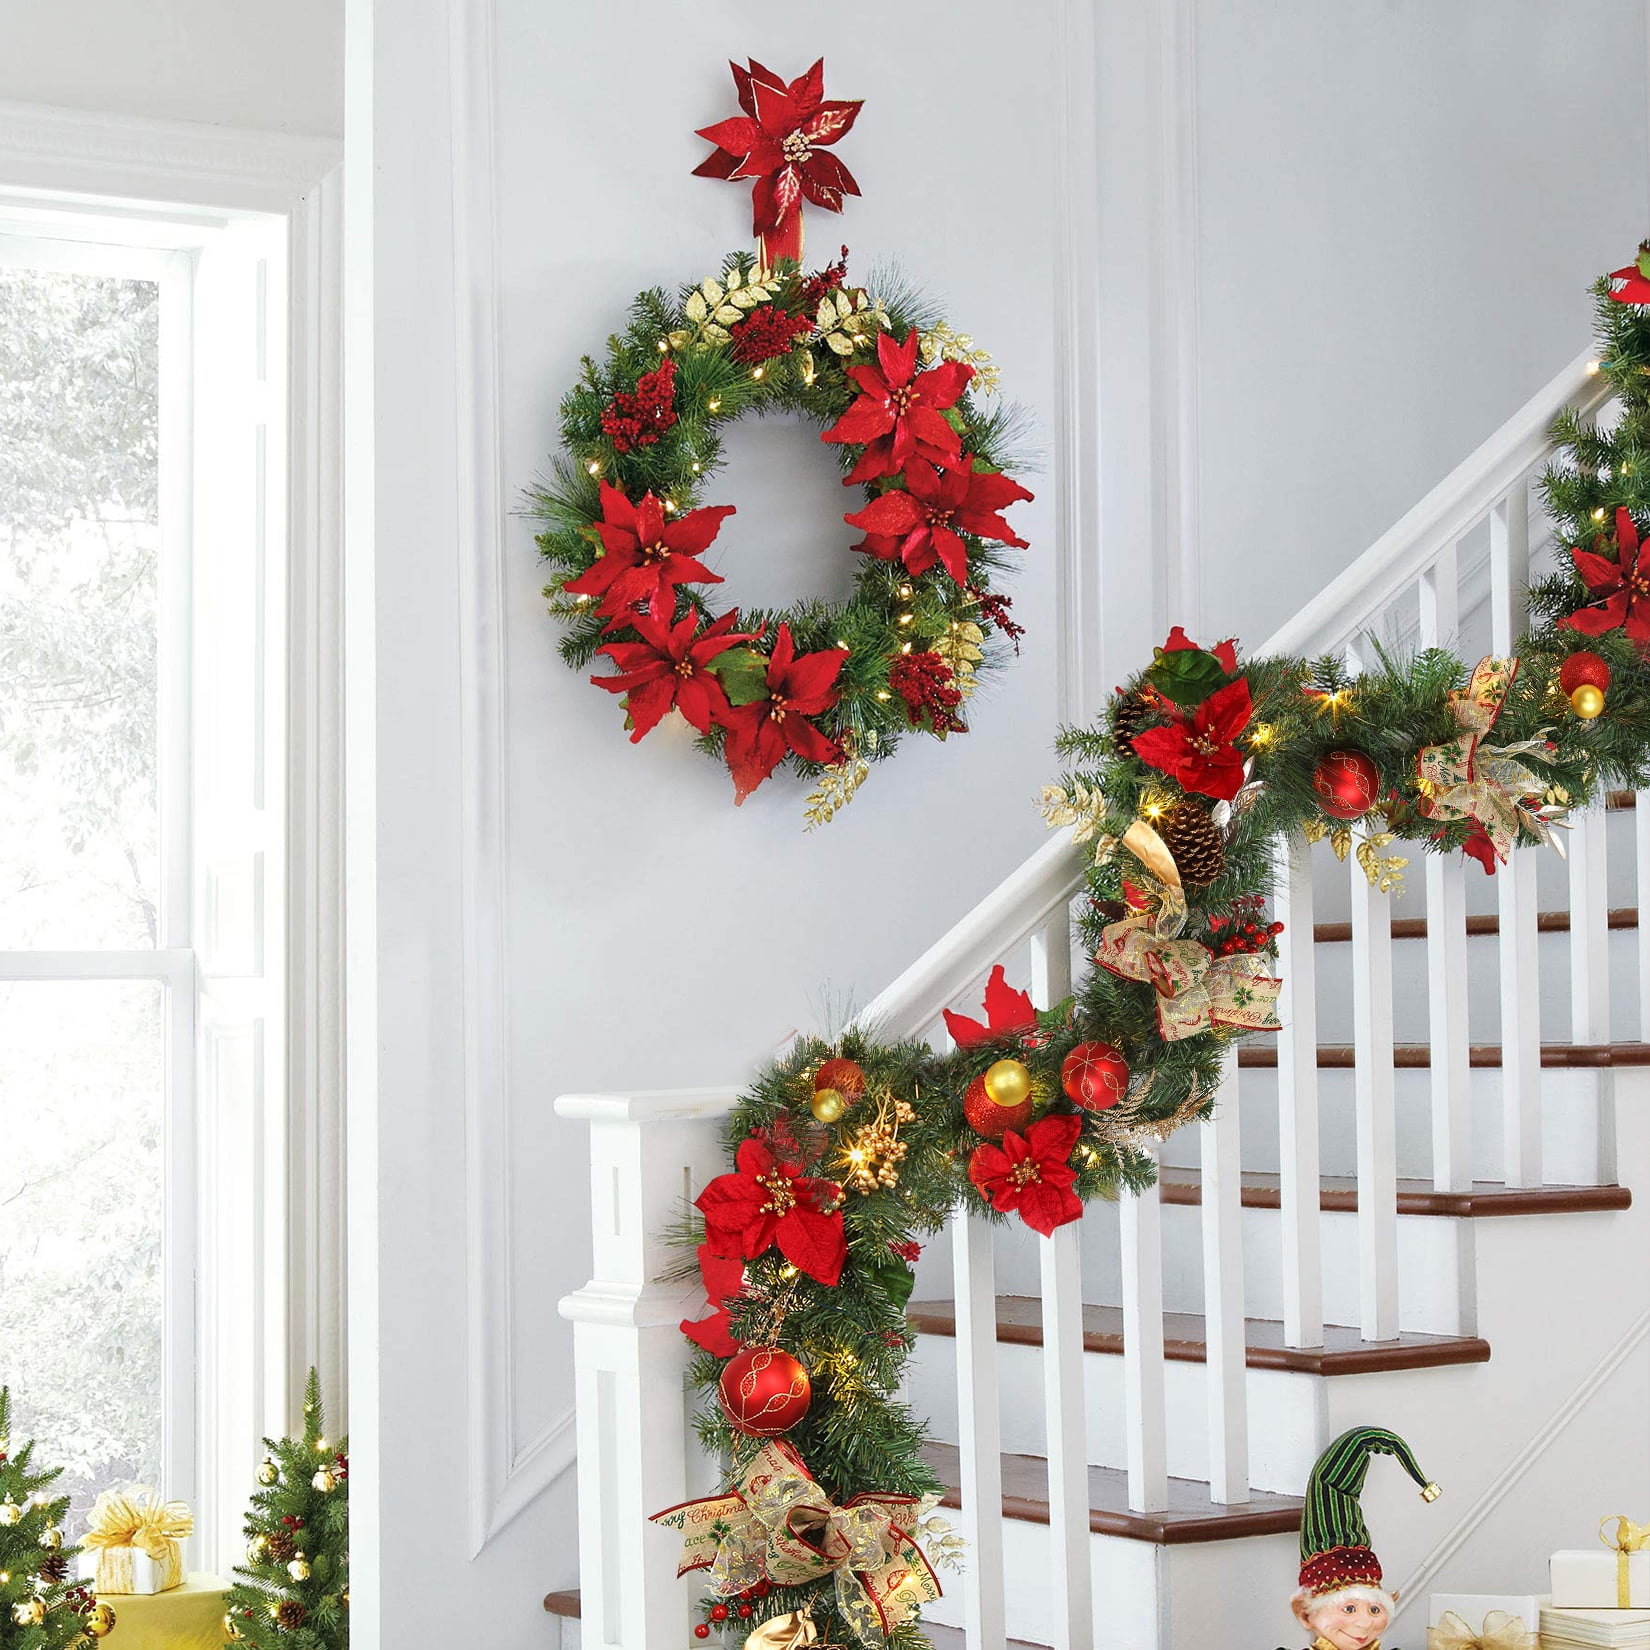 The Holiday Aisle Large Gold Leaf Garland Decorative Gold Garland for Christmas Fireplace Decor Front Door Stairs Engagement